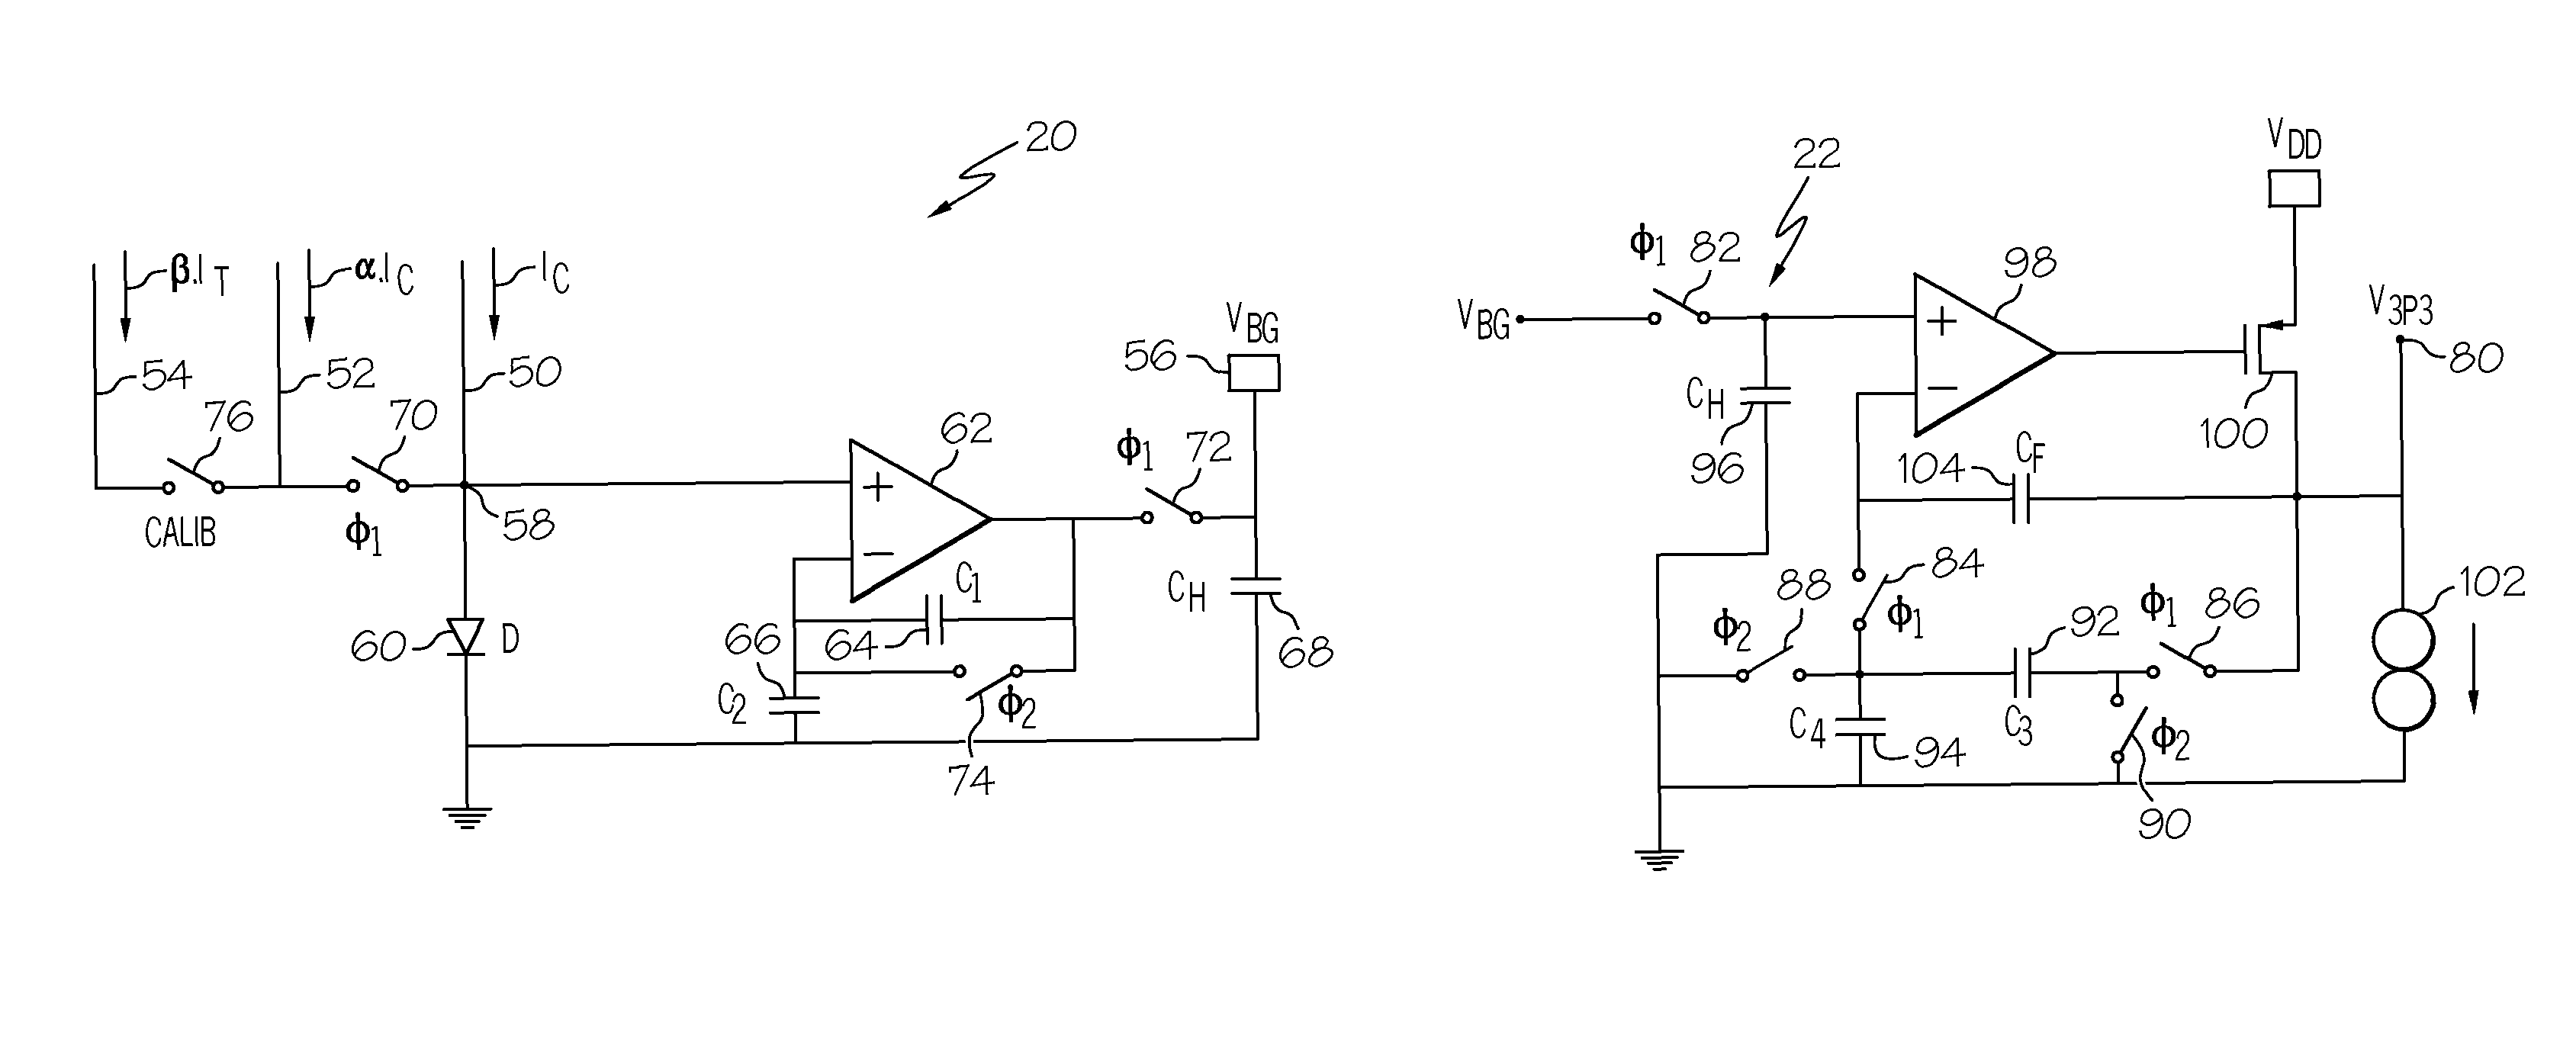 Curvature-compensated band-gap voltage reference circuit